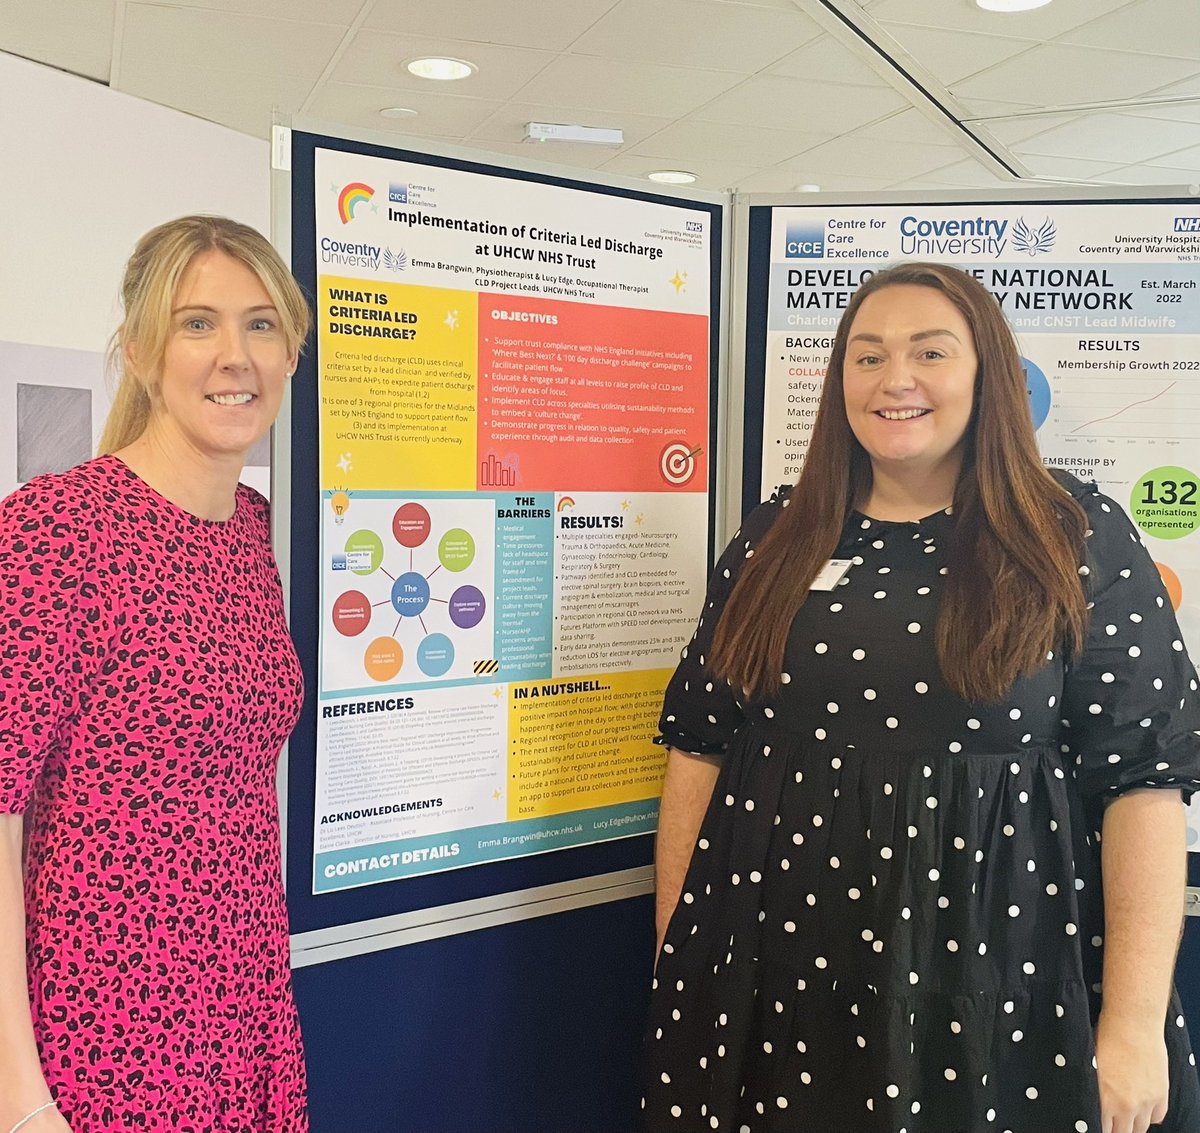 🌈 ✨ Poster presentation of our Criteria Led Discharge work at the Centre for Care Excellence Inspiration Day ✨🌈 #criterialeddischarge @CfCExcellence @EmmaBrangwin @elainepclarke @LizzieDeutsch